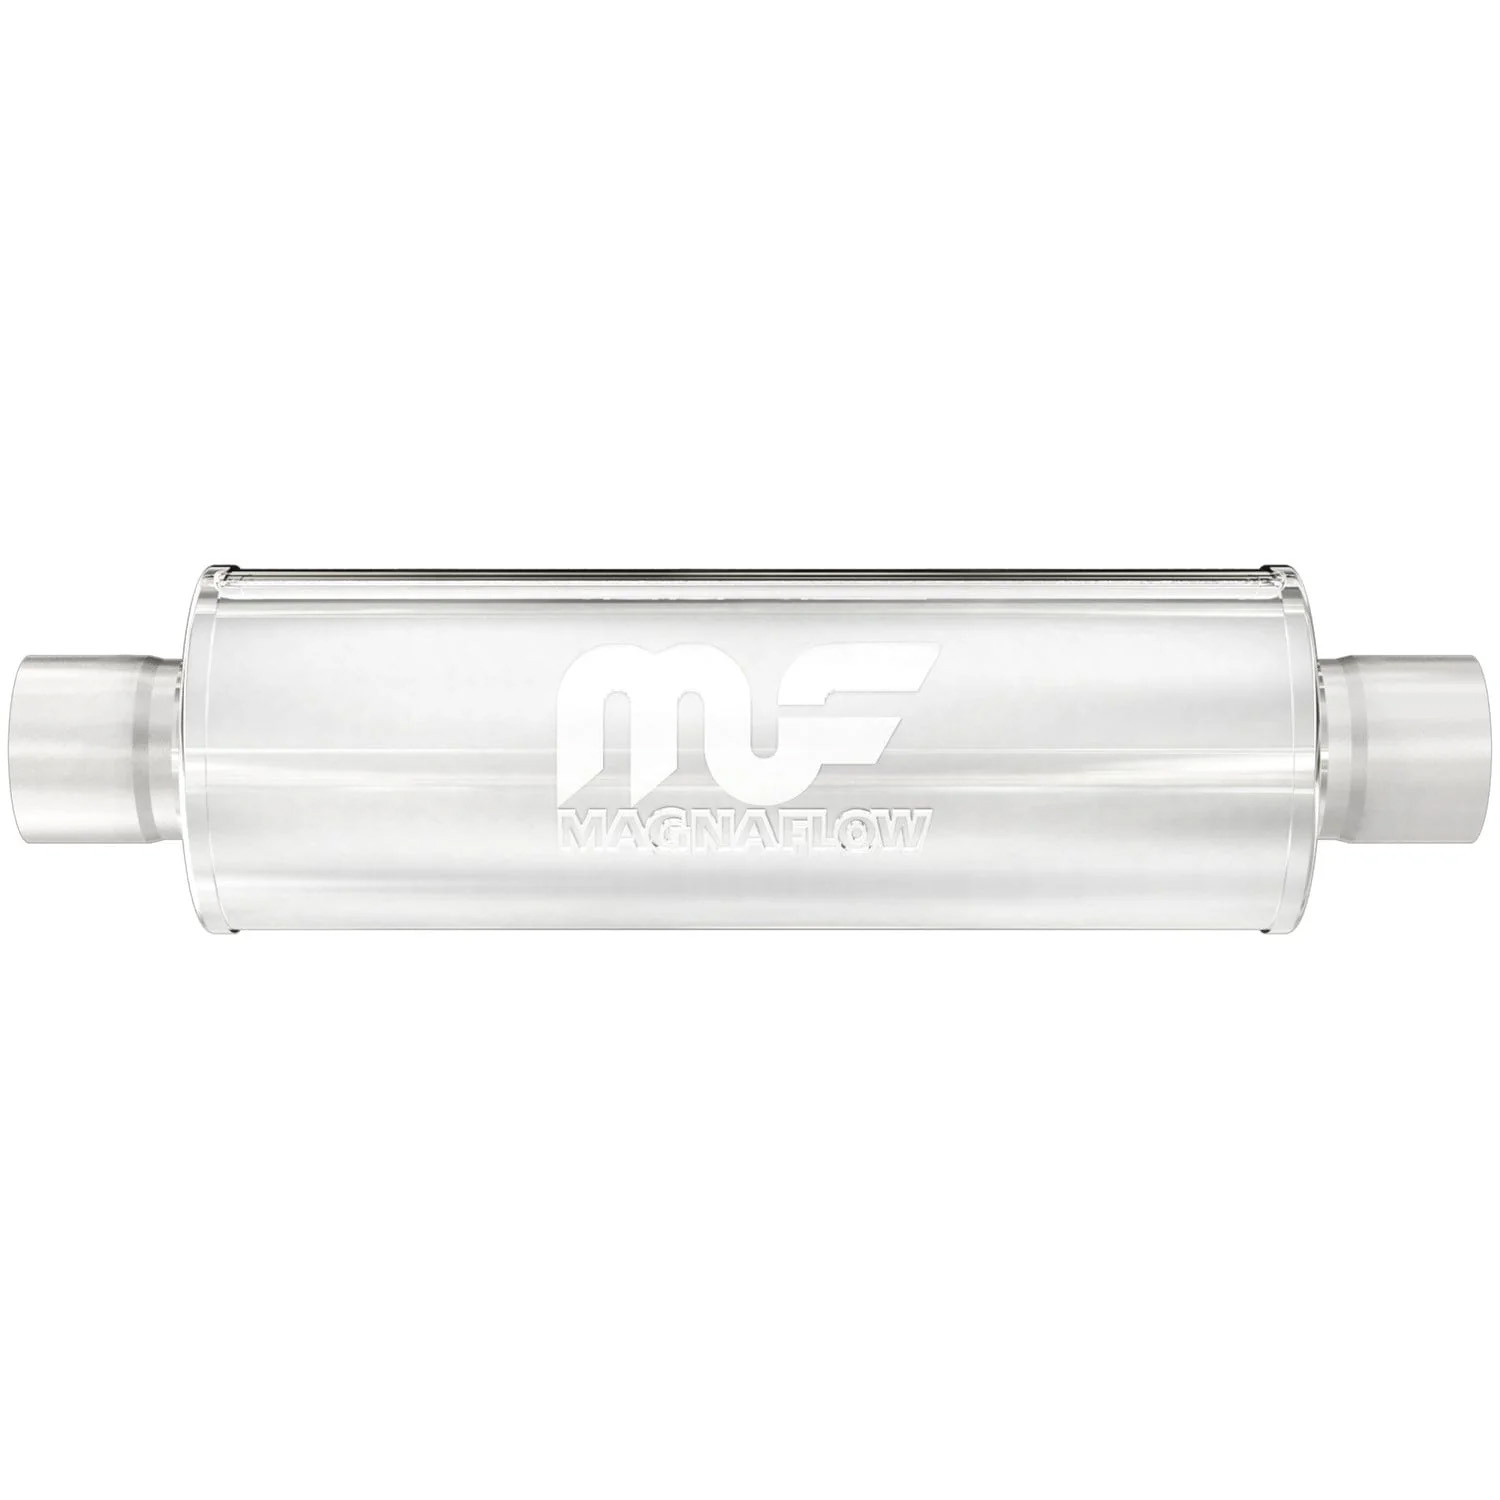 Magnaflow Exhaust 14619 Muffler, Bullet, 3 in Center Inlet, 3 in Center Outlet, 6 in Diameter Body 20 in Long, Stainless, Polished, Universal, Each